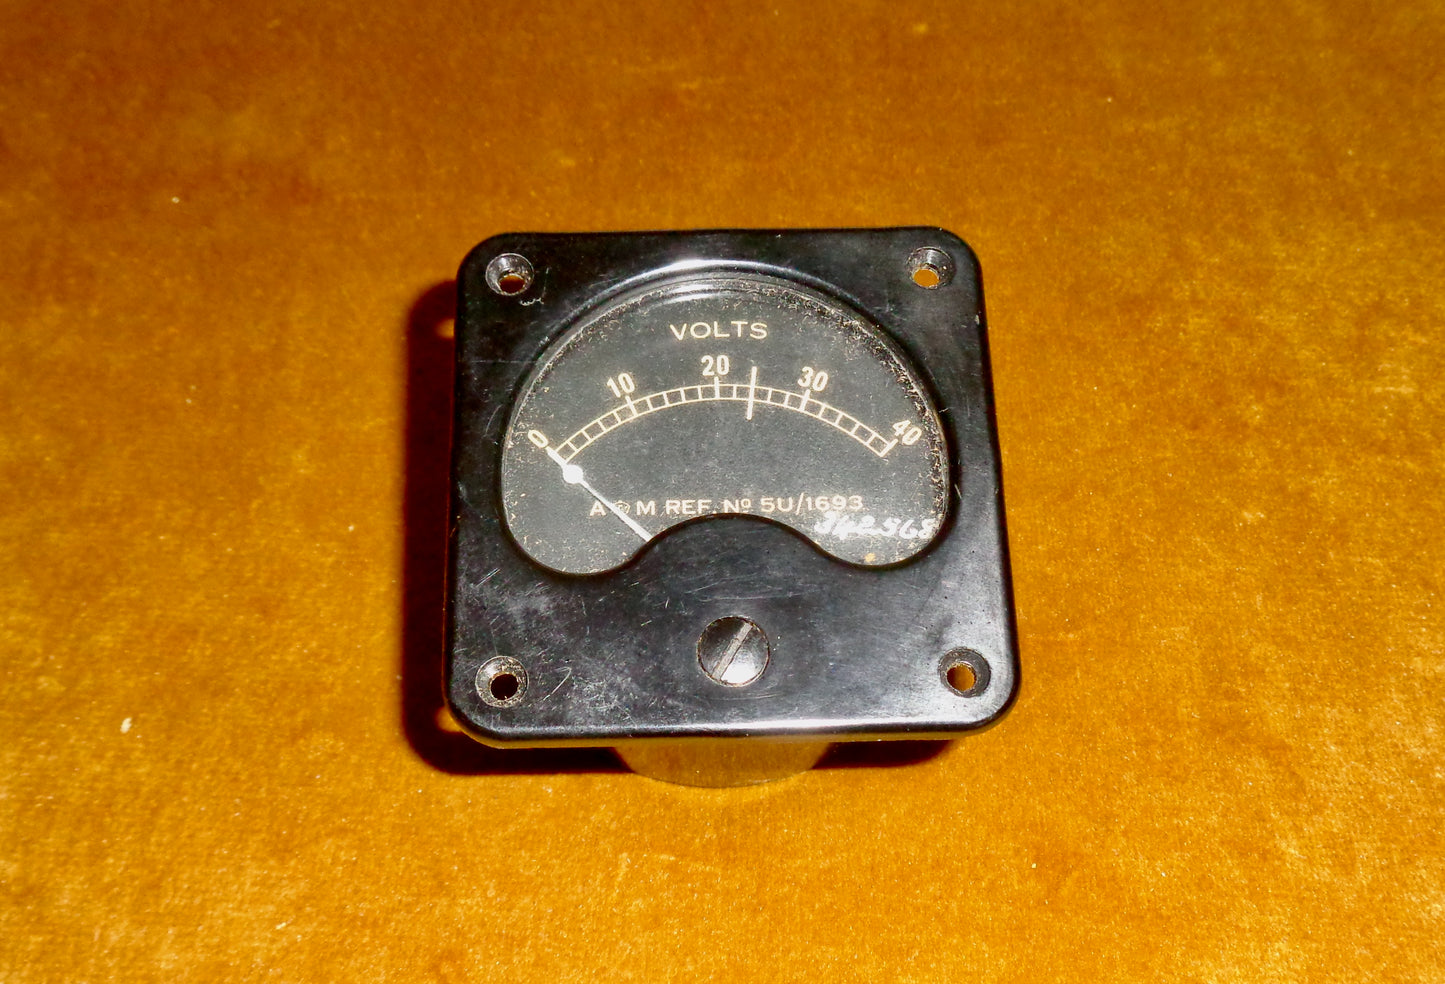 WW2 Aircraft Voltmeter 0-40 Volts 5U/1693 And New Old Stock